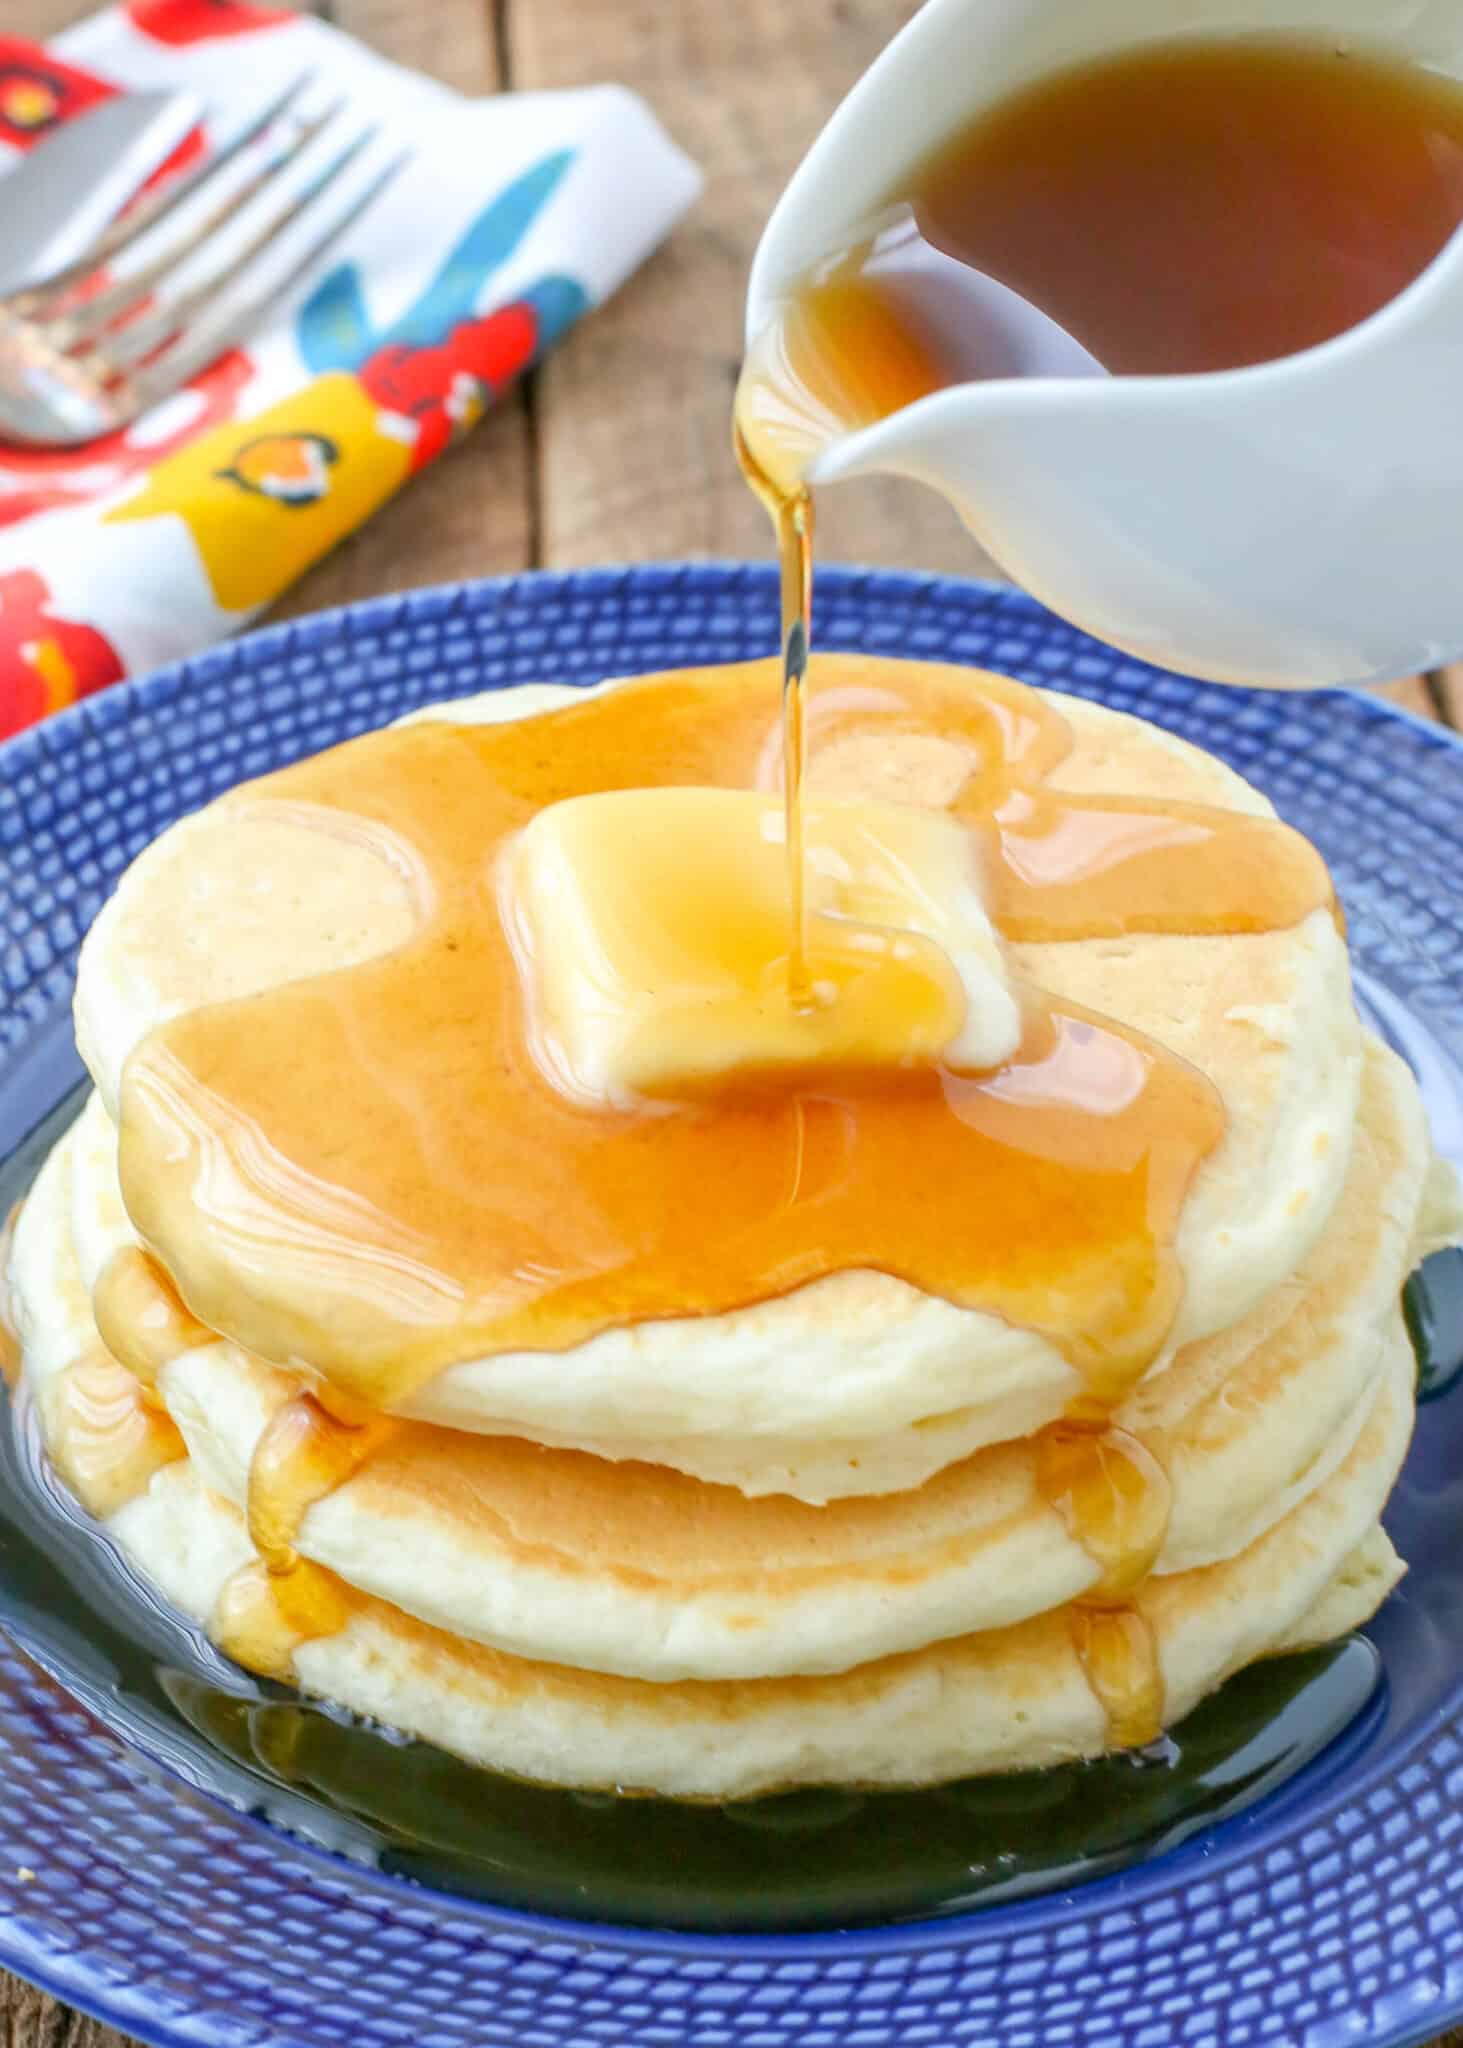 How To Make Perfect Pancakes - Barefeet in the Kitchen